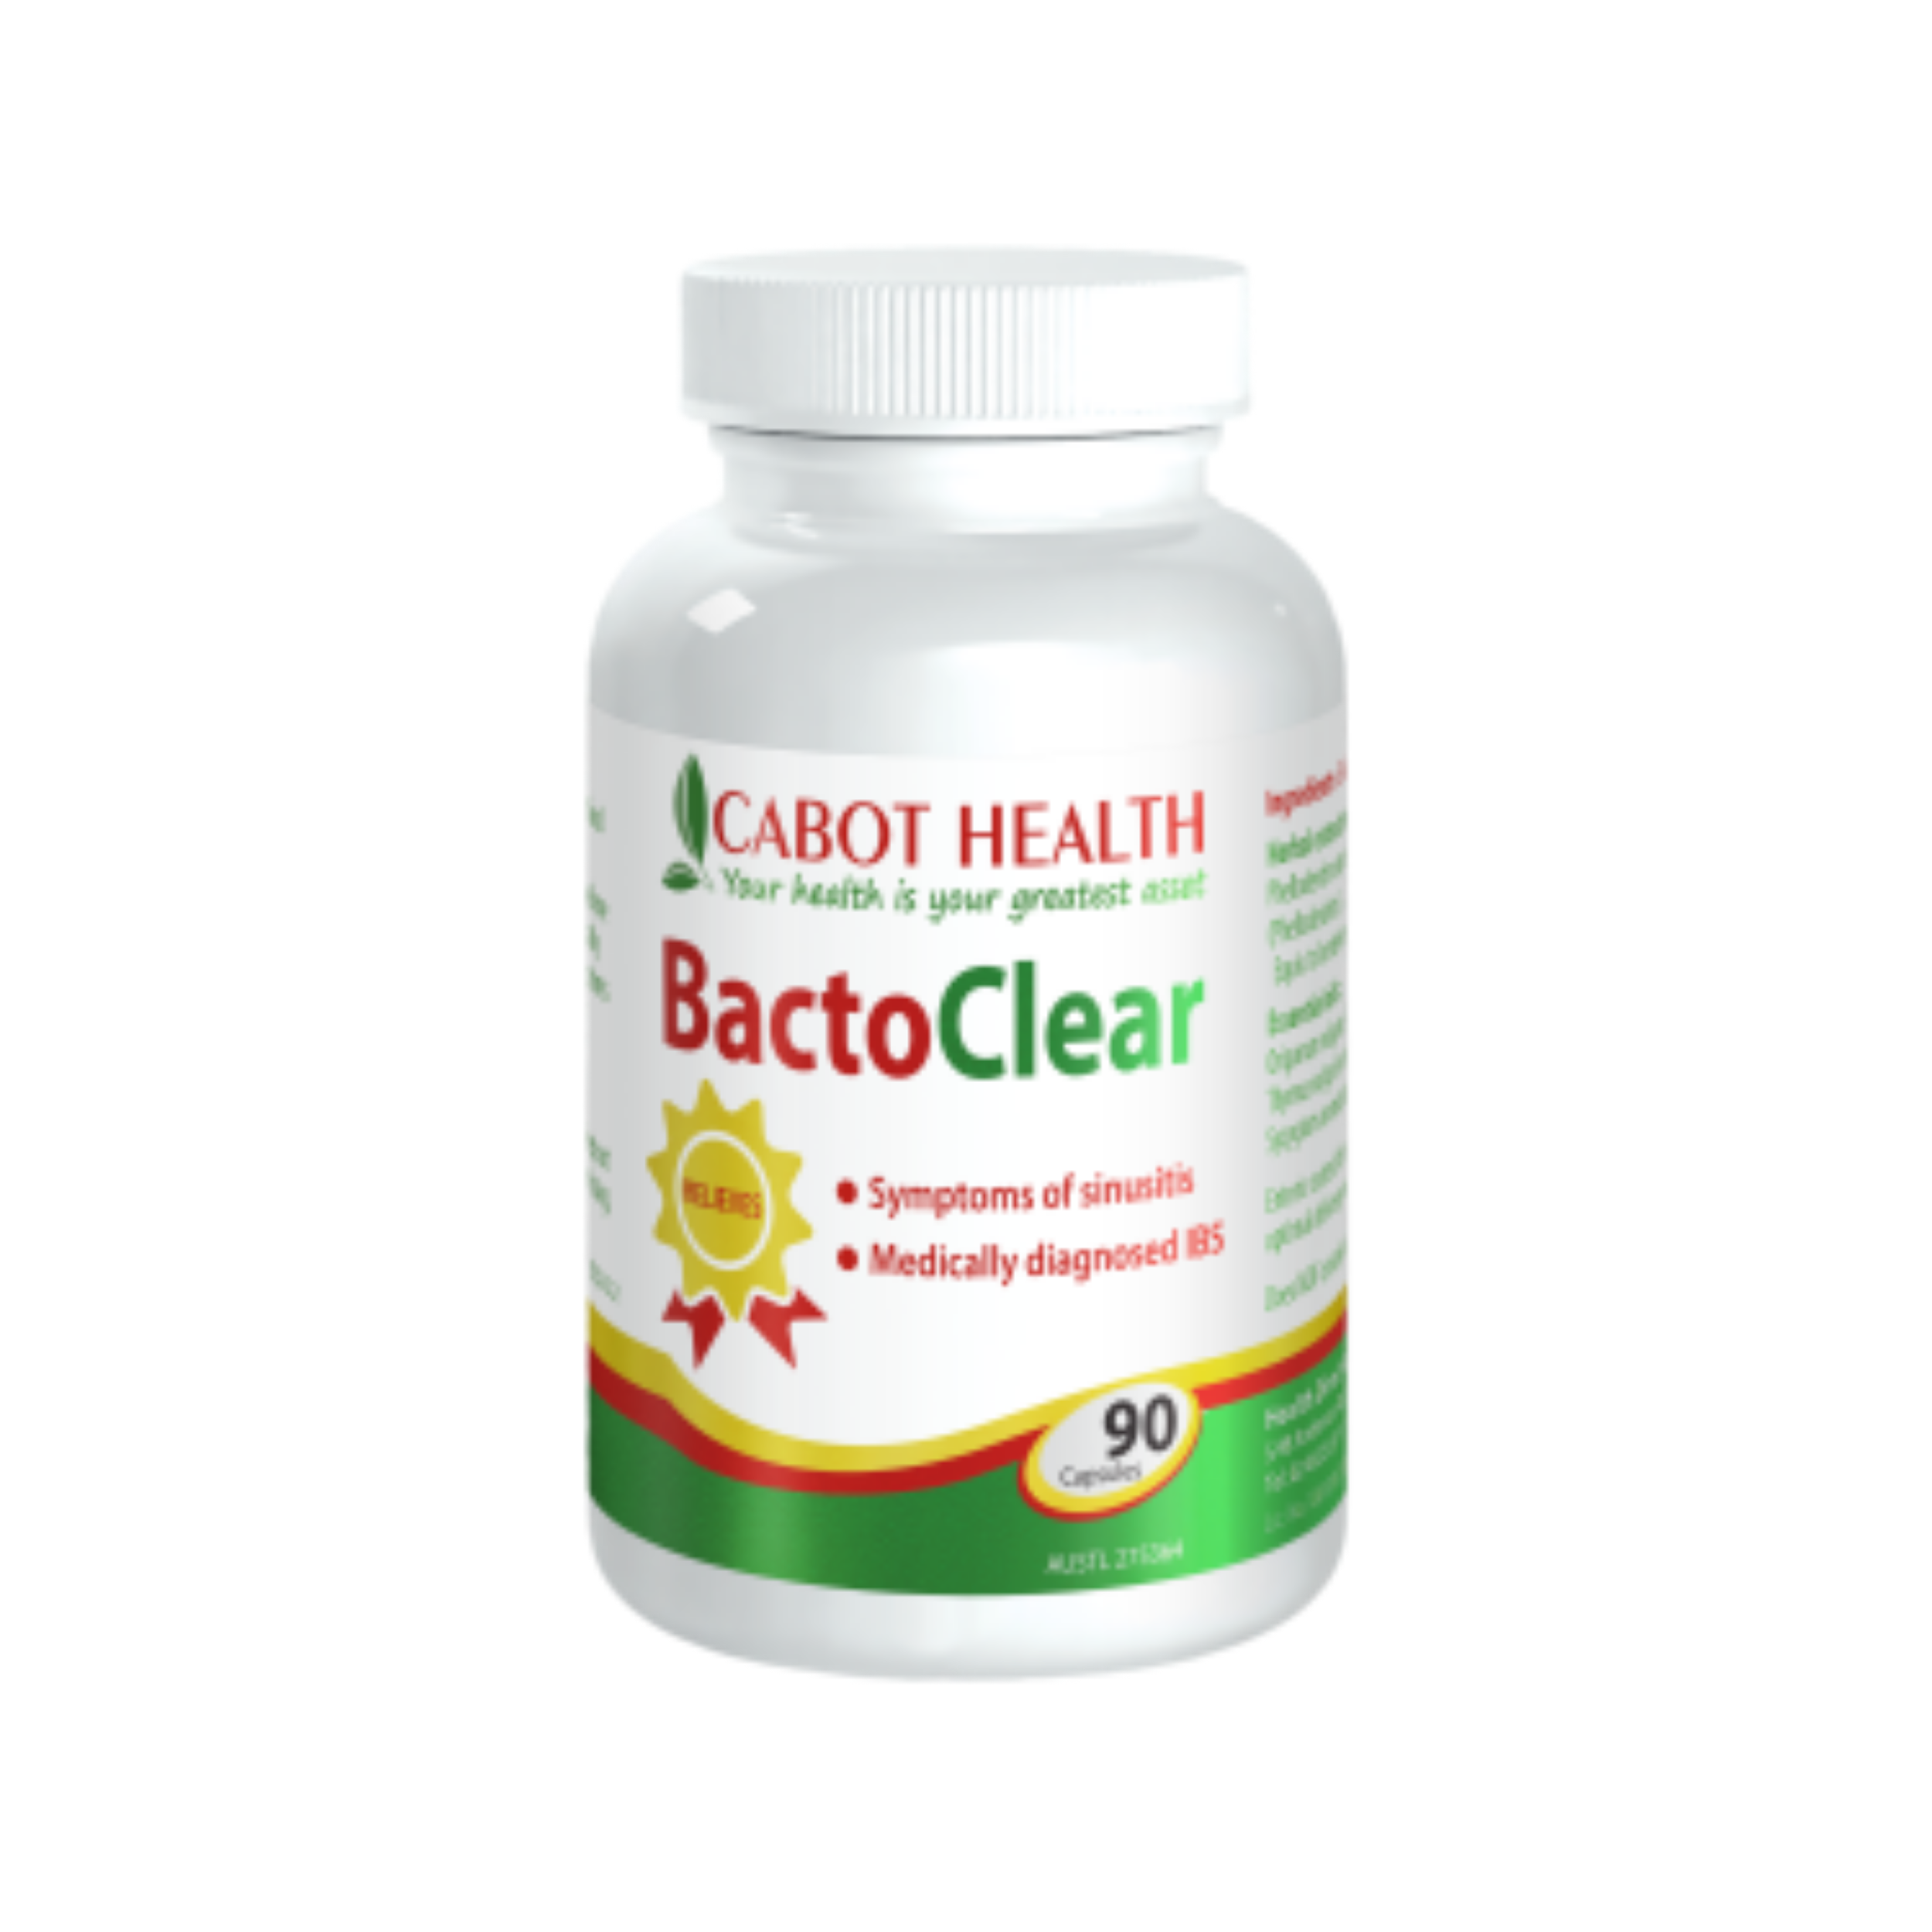 Cabot Health Bactoclear 90 capsules